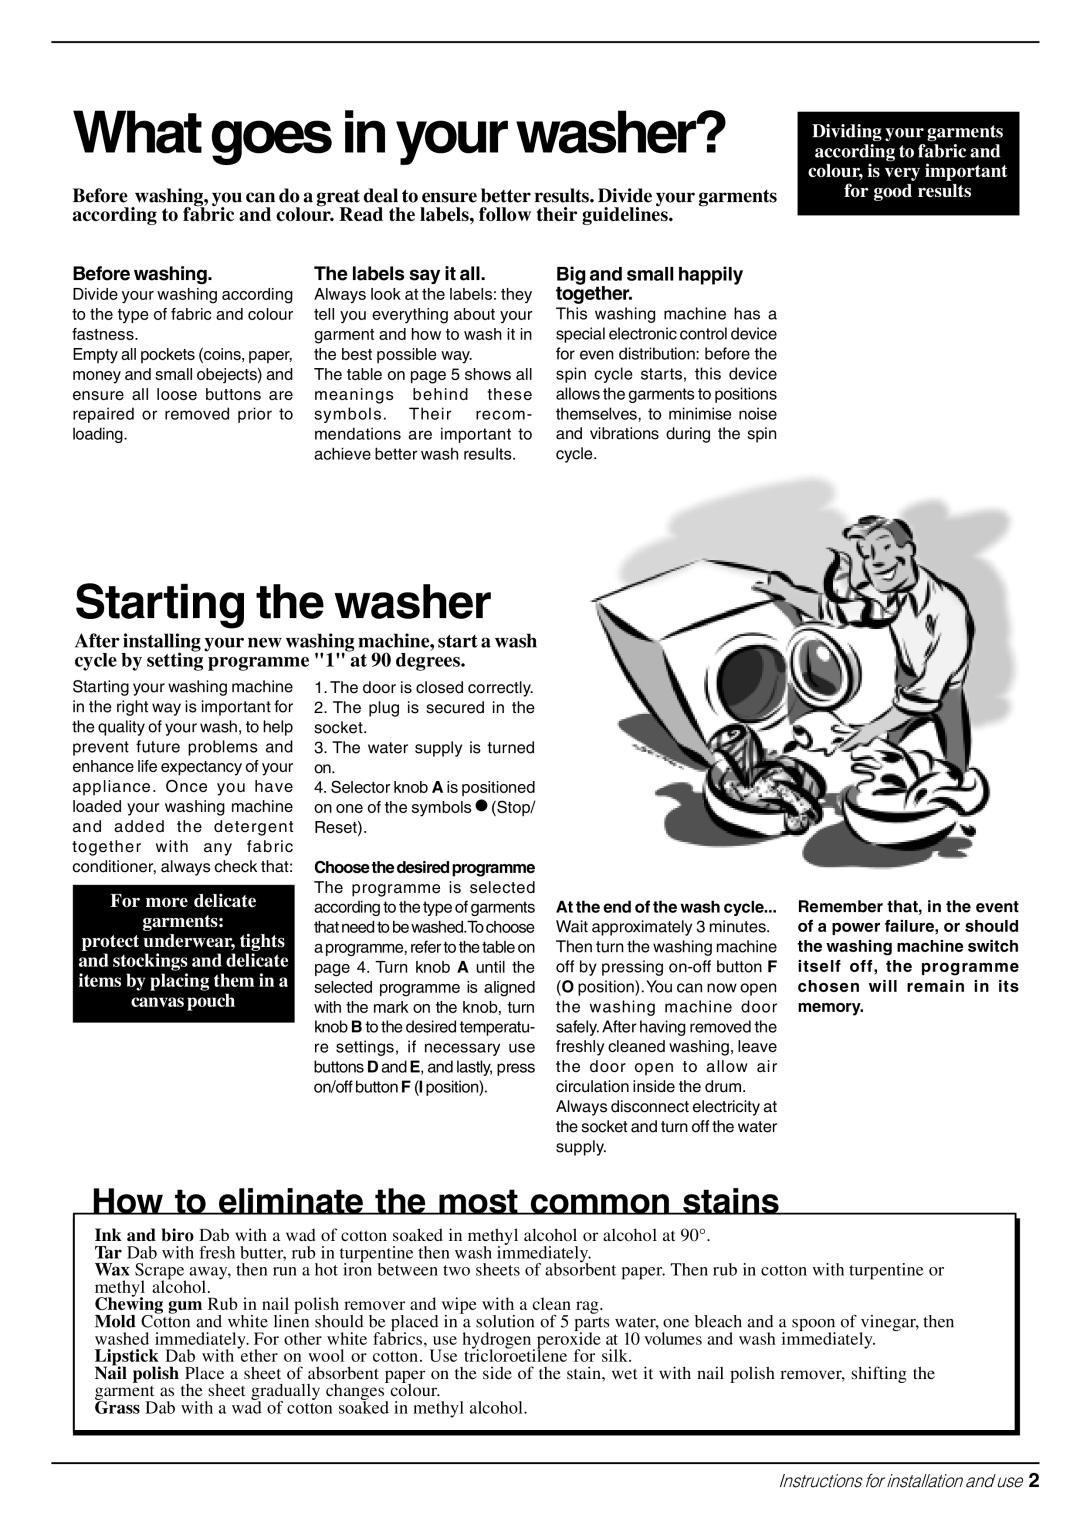 Indesit W 103 How to eliminate the most common stains, What goes in your washer?, Starting the washer, Before washing 